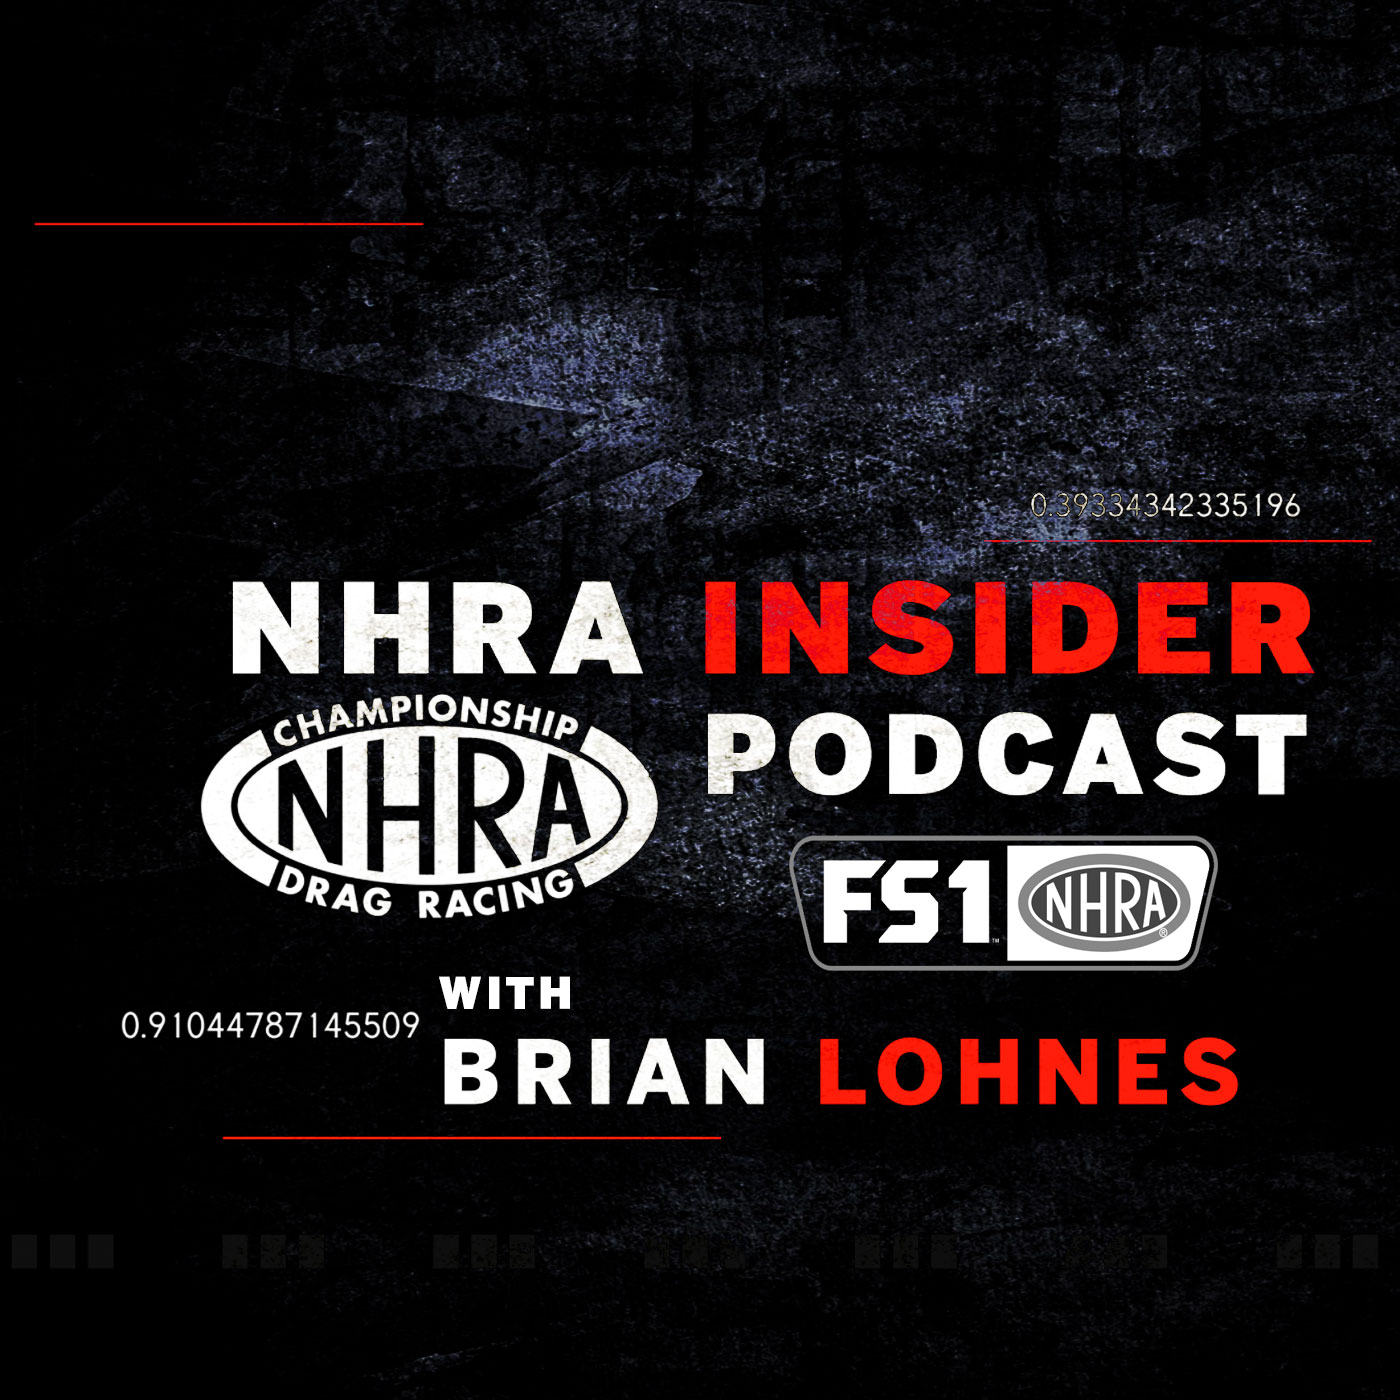 Listen Up: This NHRA Insider Brings Phil Burgess and Tony Pedregon To Talk Who’s Hot and Who’s Not